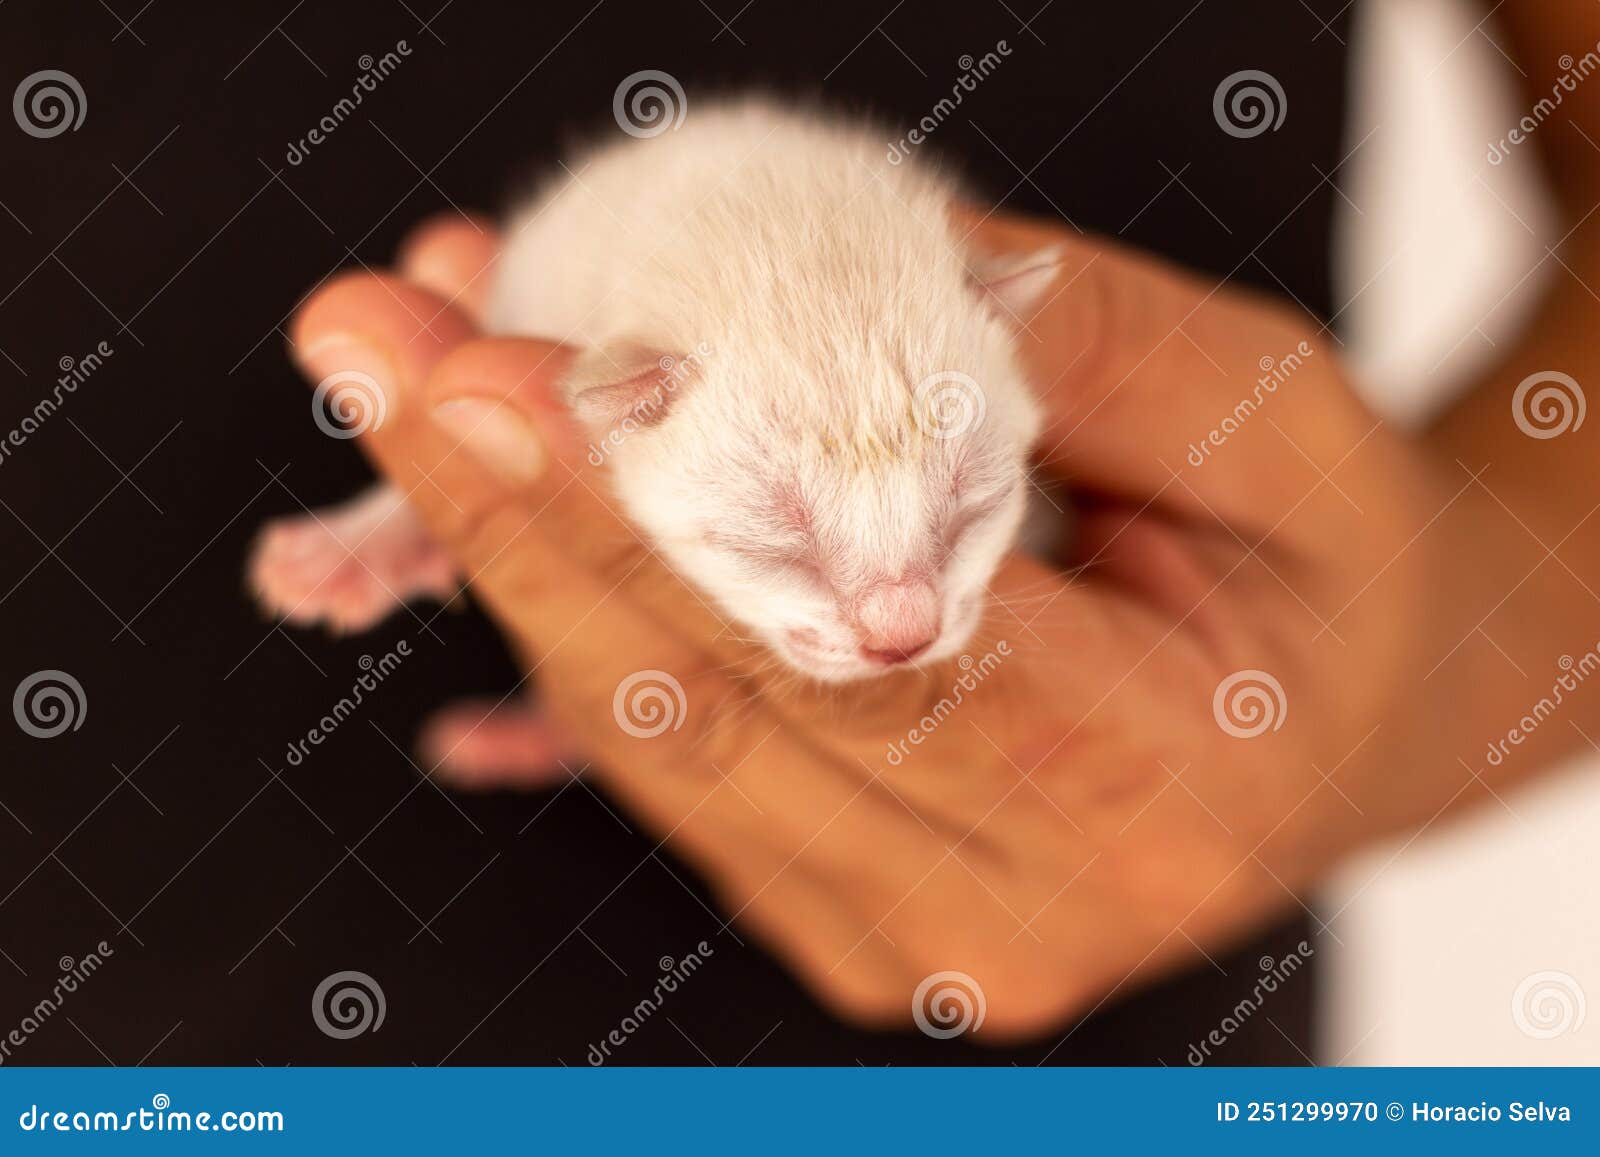 small newborn cat held by the hand of a man dressed in black. concept of frailty